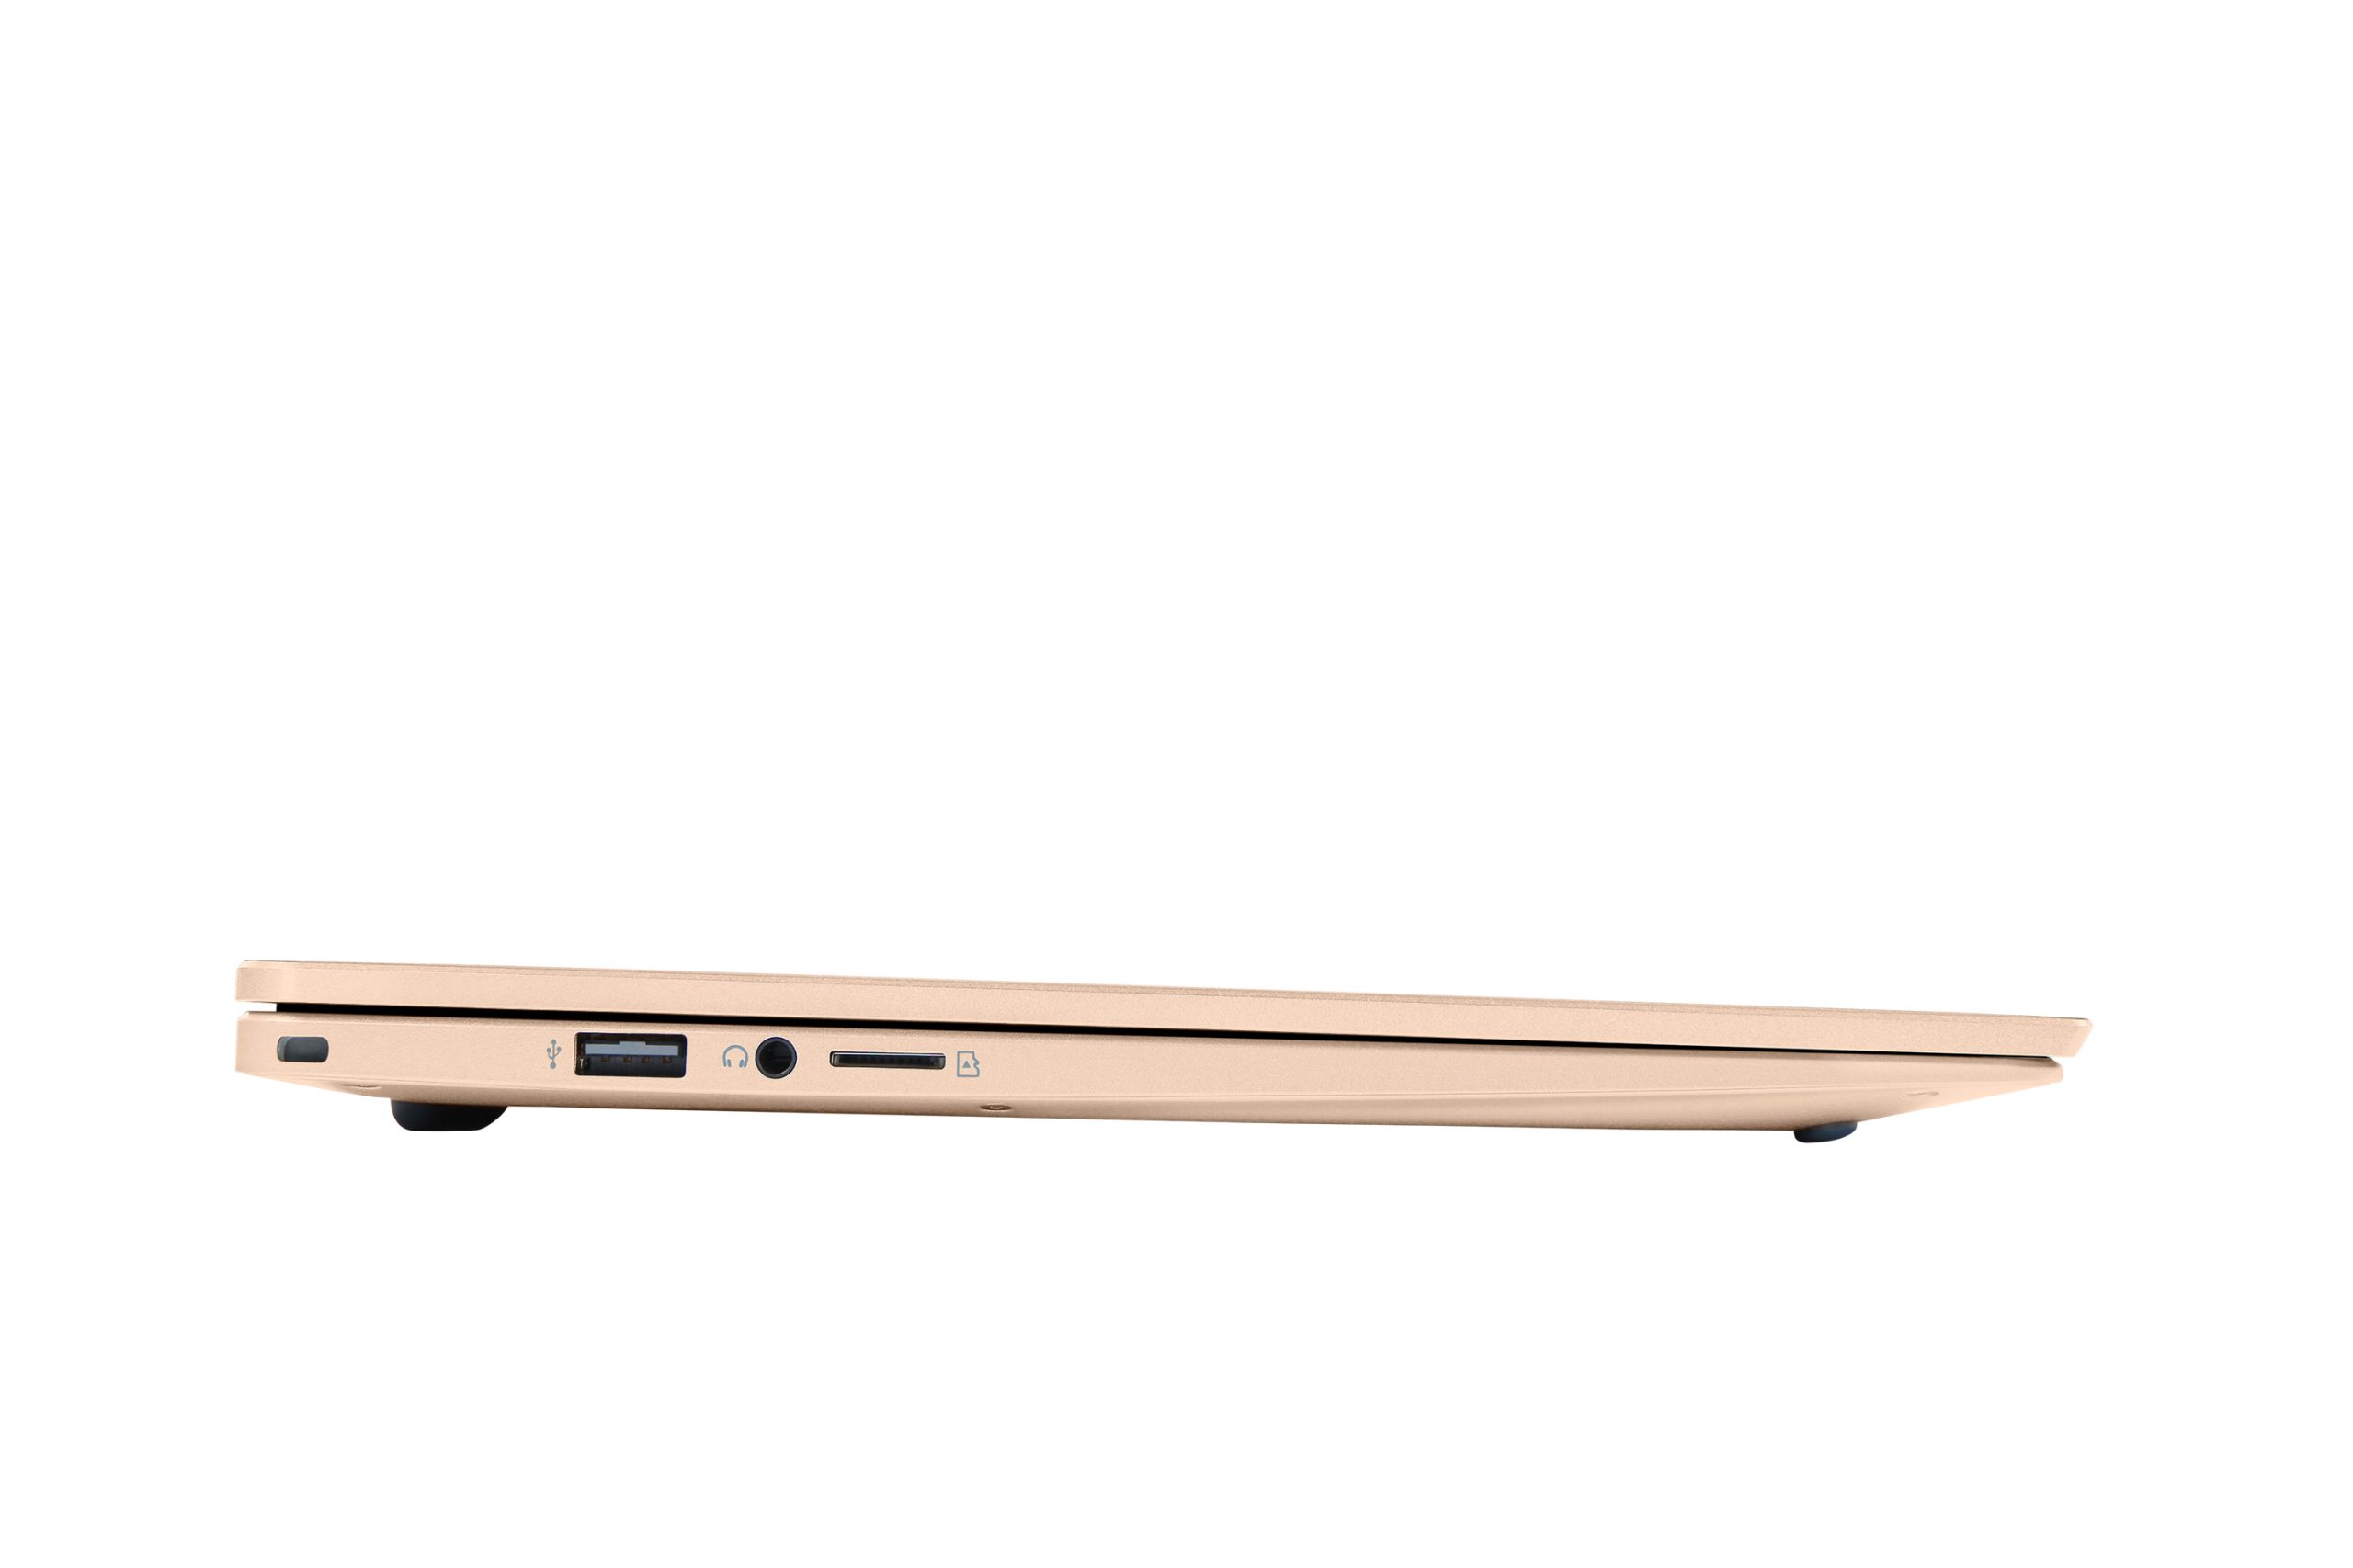 https://t2qwifi.com/wp-content/uploads/2020/07/avita_laptop_2020_angle3_0025_high_champagne-gold-1-scaled.jpg